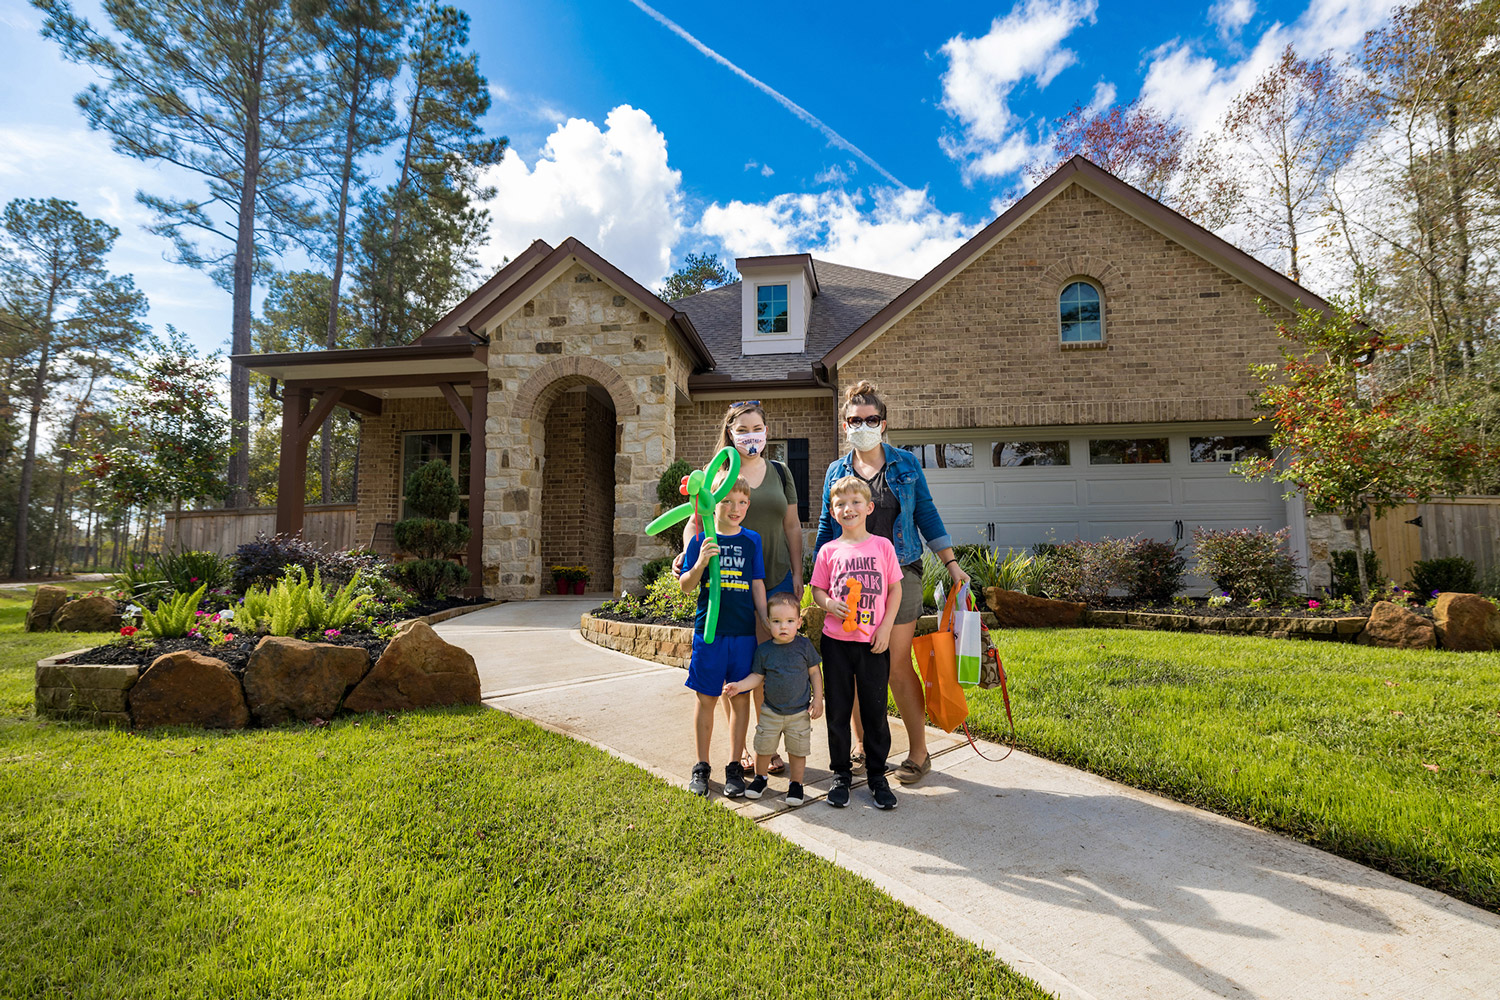 Successful Second Annual “Harvest In The Hills” Model Home Tour In The Woodlands Hills